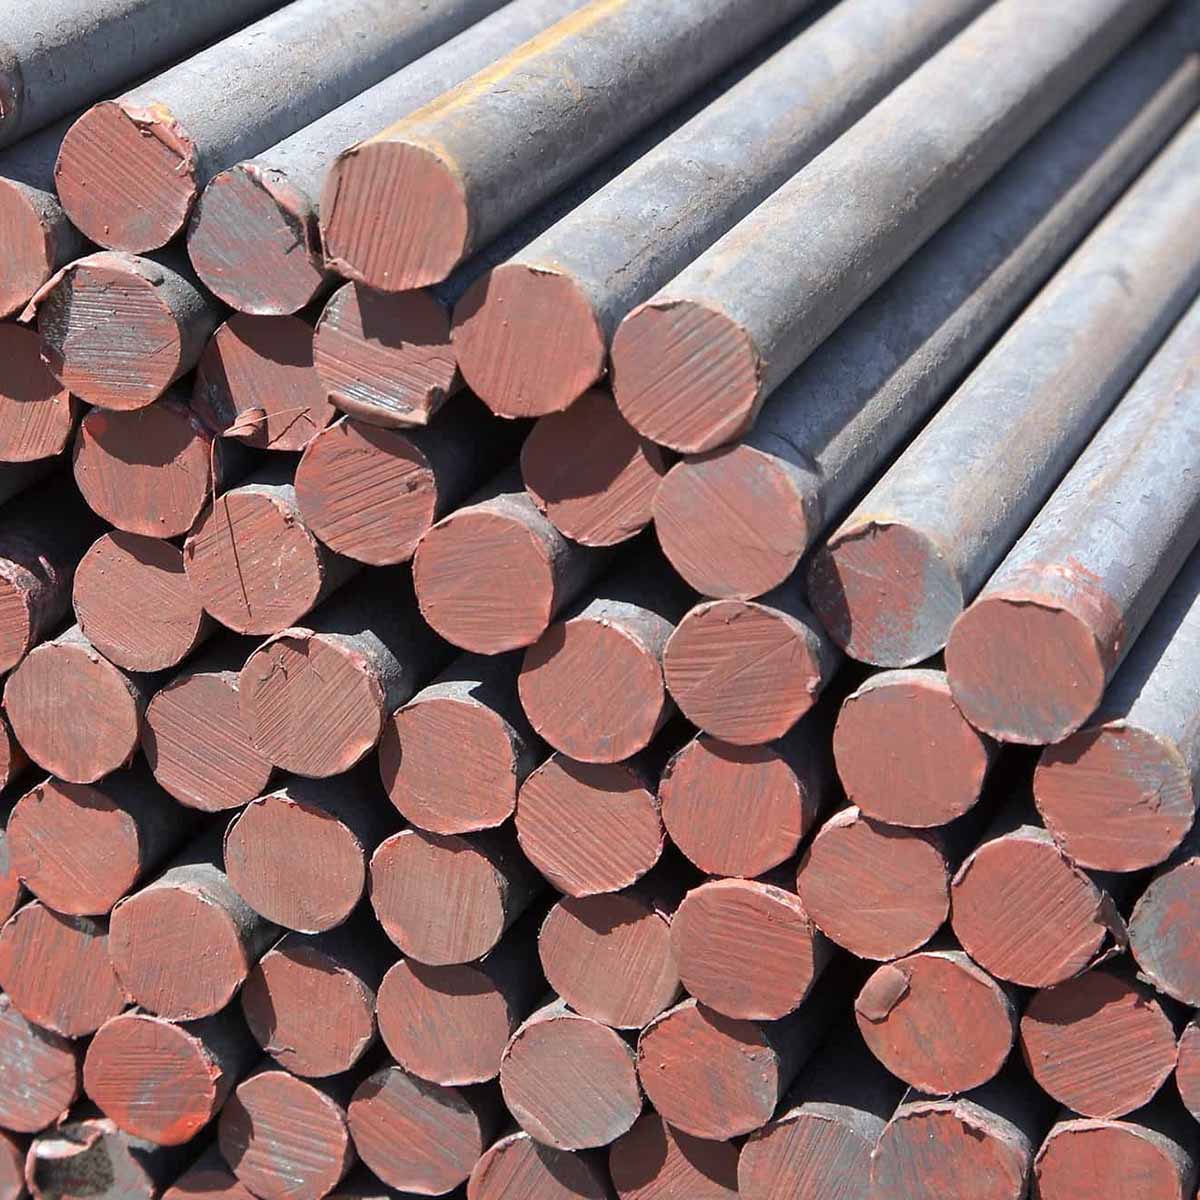 SAE 4150 Alloy Steel Round Bar Manufacturers, Suppliers, Importers, Dealers in Mumbai India